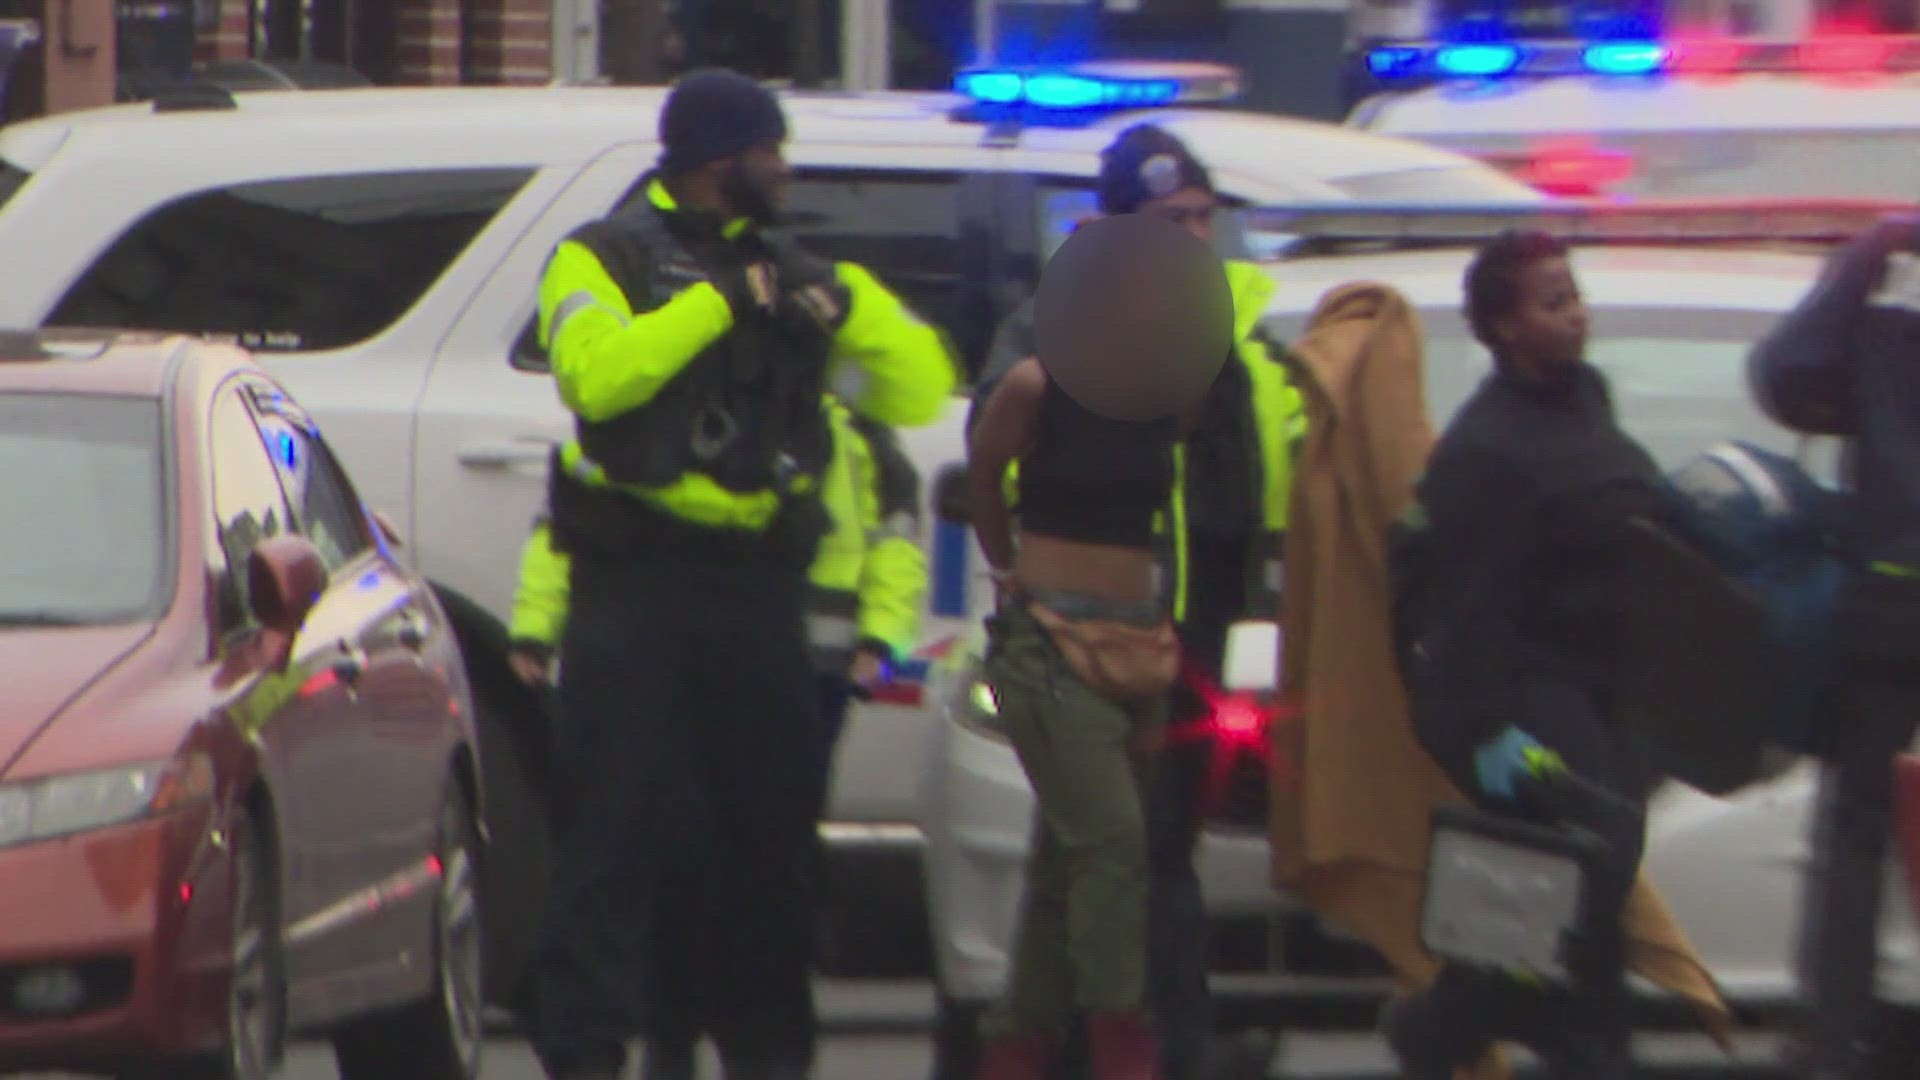 Police have detained two people following a reported armed robbery in Northwest D.C. Thursday morning. DC Police responded to a report of a barricaded person.